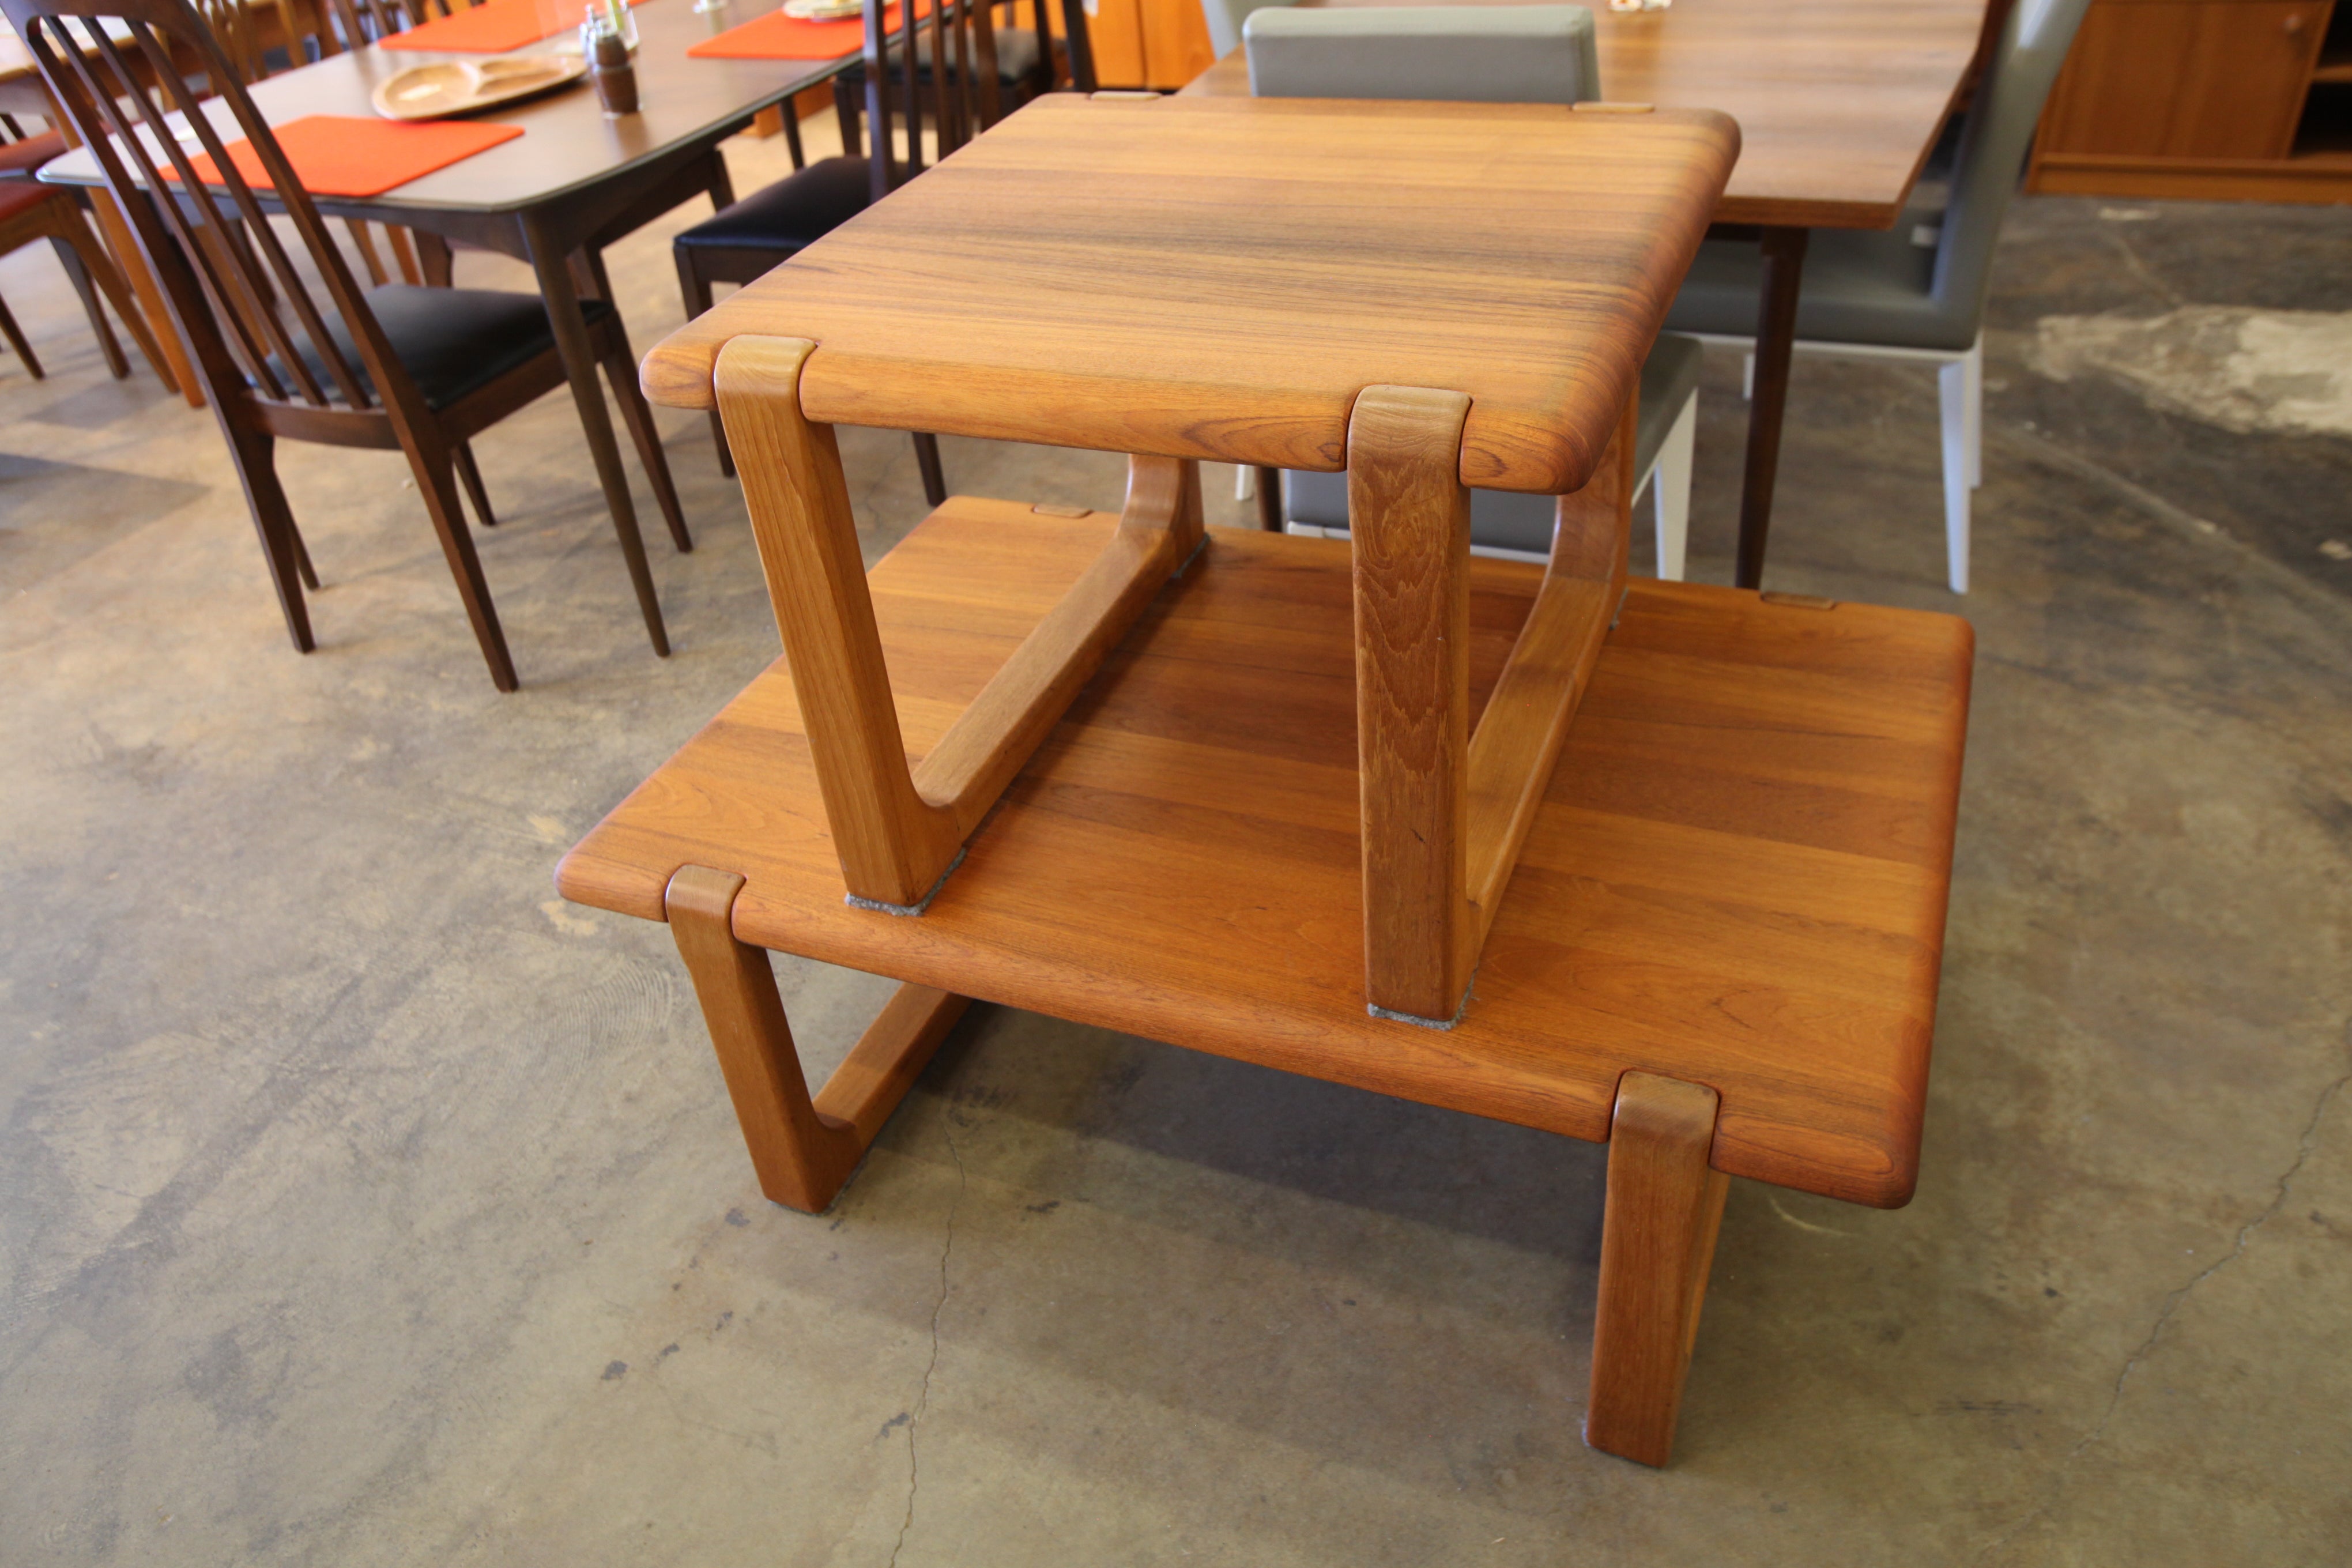 Vintage "SOLID TEAK" Side Table by Niels Bach (27.5" x 27.25" x 19.75"H)